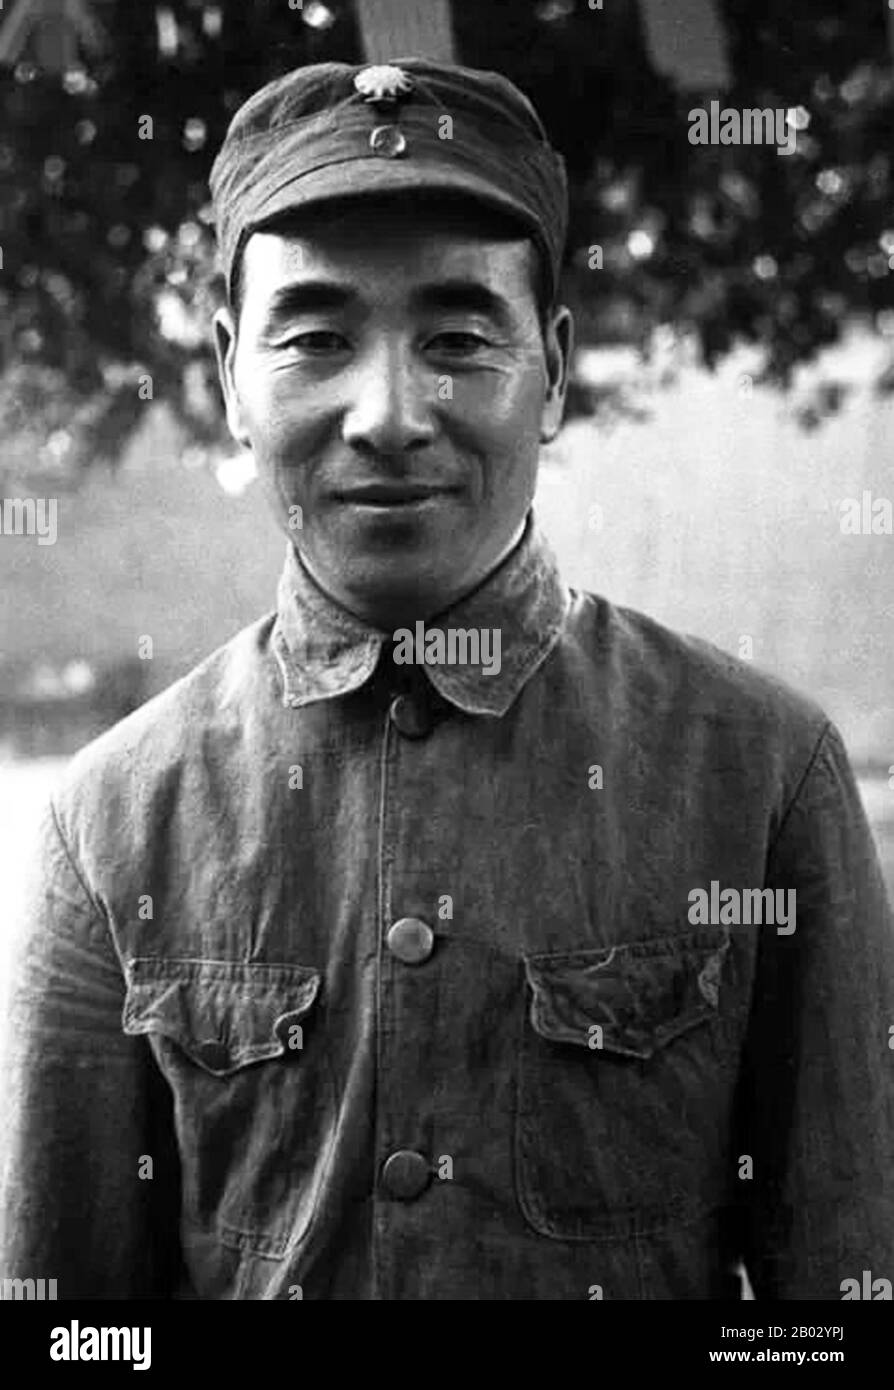 Lin Yurong, better known by the nom de guerre Lin Biao (December 5, 1907– September 13, 1971) was a Chinese Communist military leader who was instrumental in the communist victory in the Chinese Civil War, especially in Northeastern China, and was the General who led the People's Liberation Army into Beijing in 1949.  He abstained from becoming a major player in politics until he rose to prominence during the Cultural Revolution, climbing as high as second-in-charge and Mao Zedong's designated and constitutional successor and comrade-in-arms. He died in a plane crash in September 1971 in Mongo Stock Photo